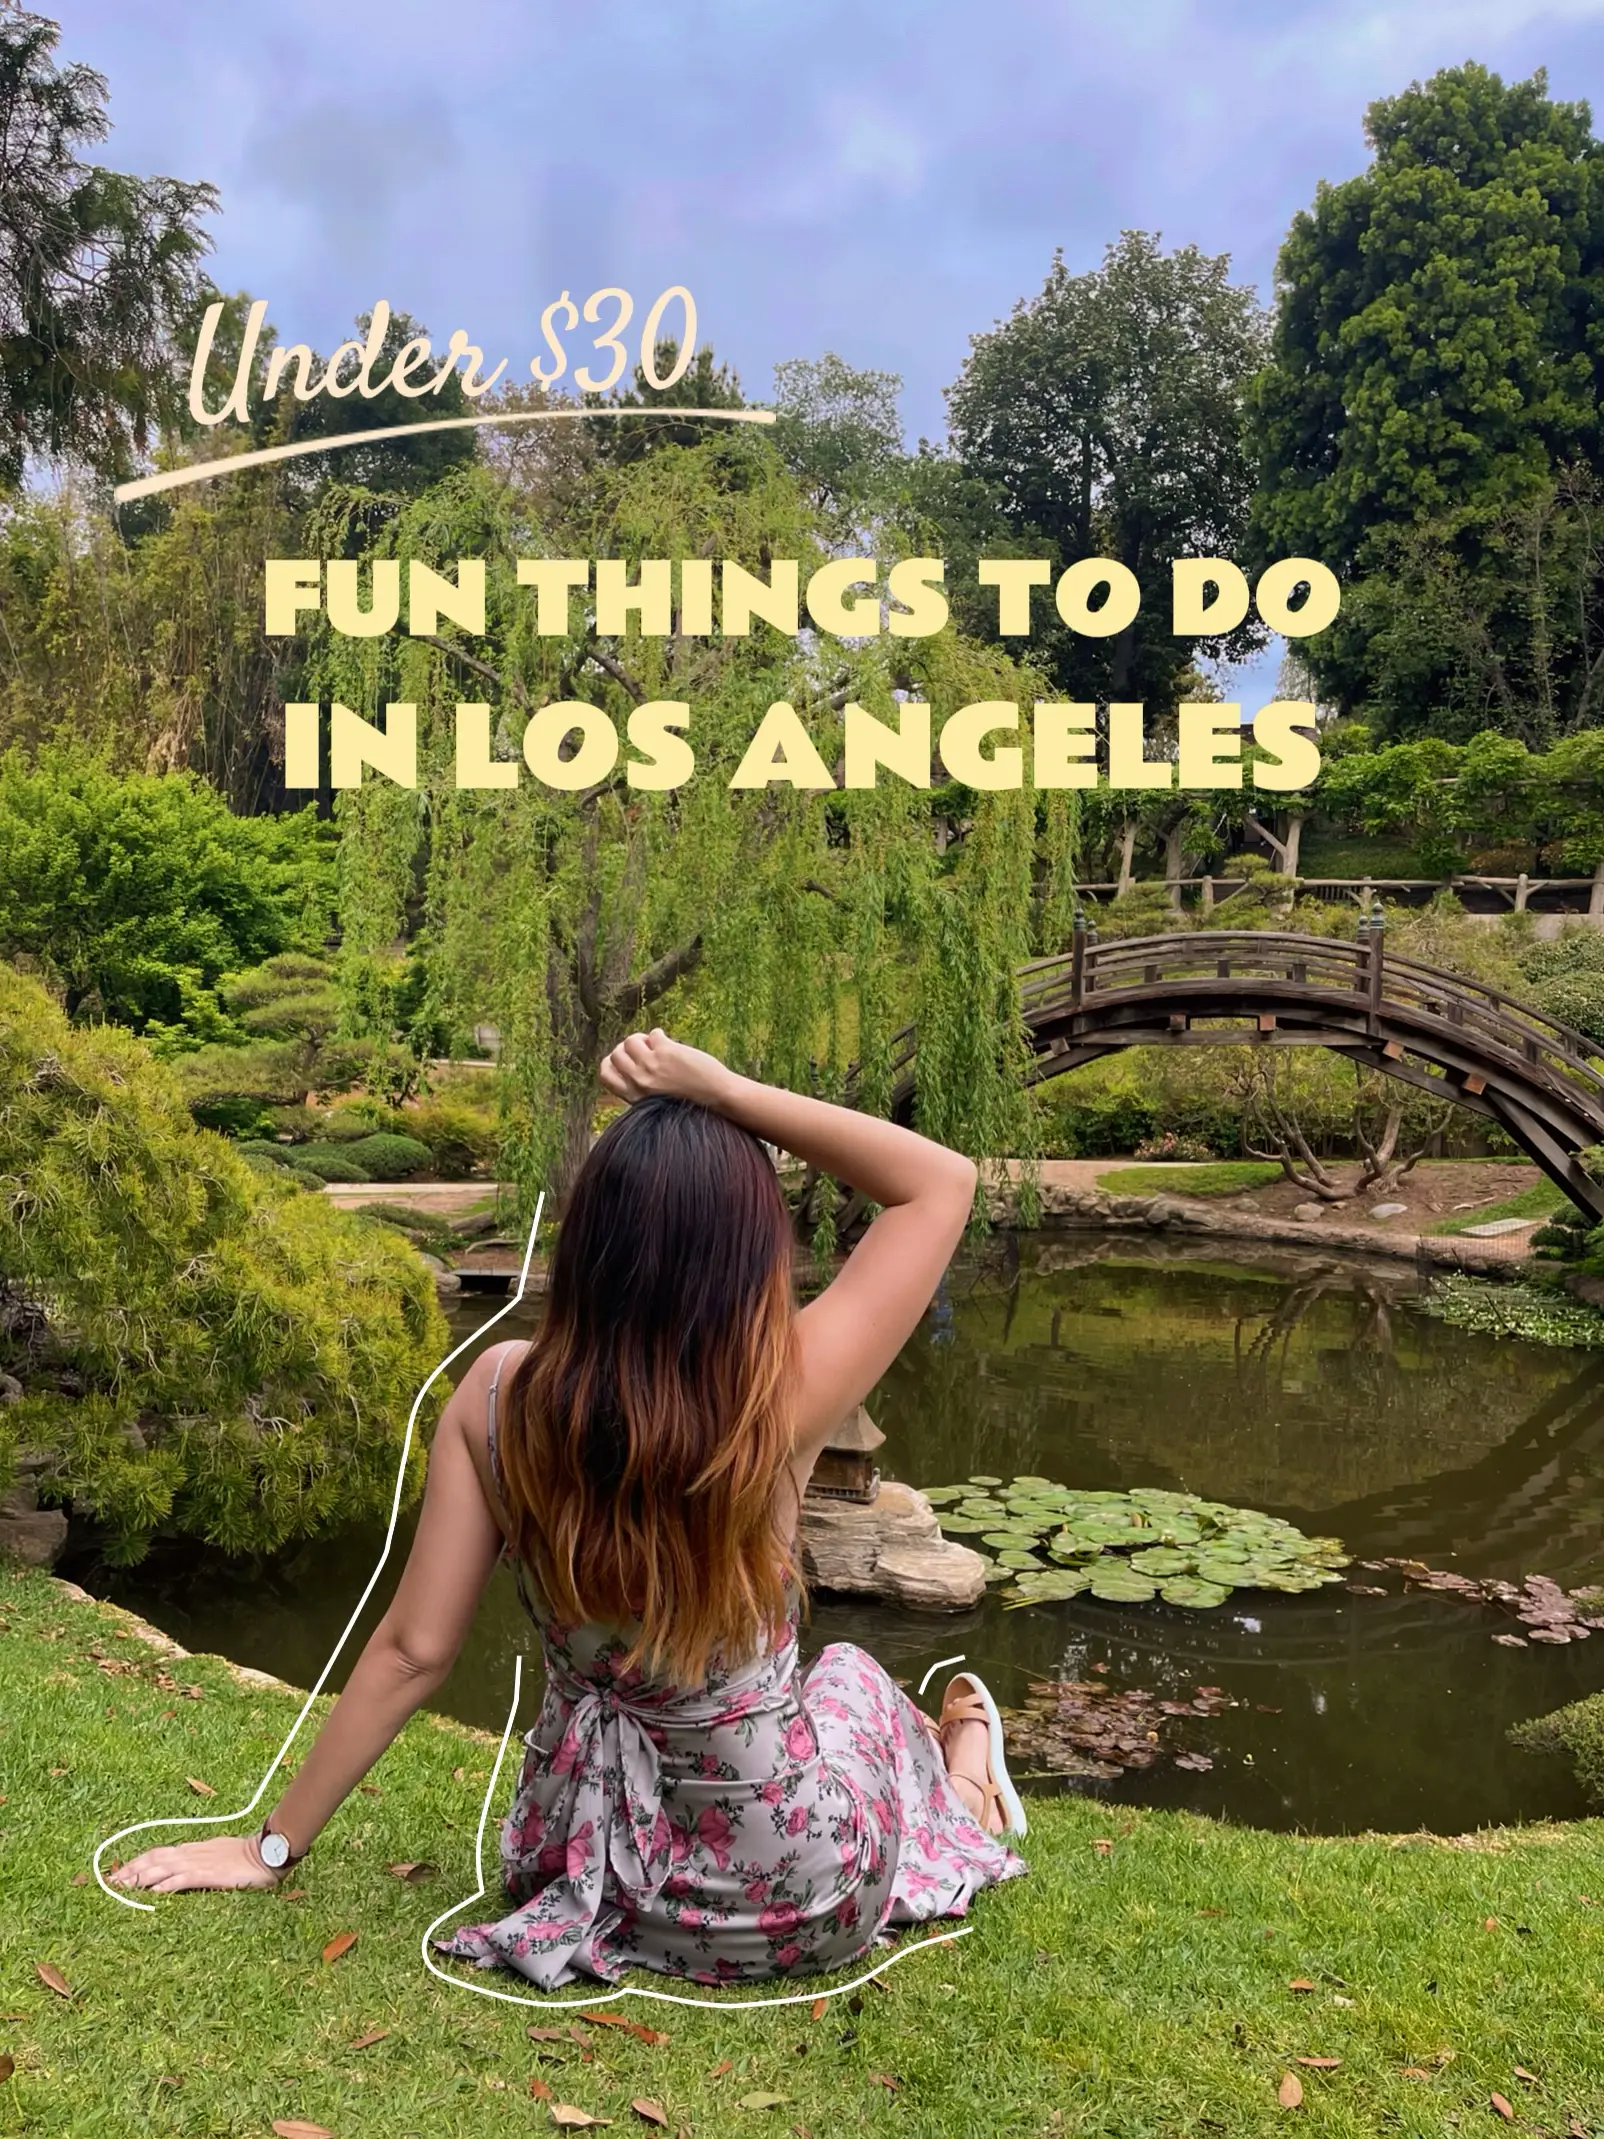 Cheap Things To Do in LA, Gallery posted by Melissa Gasia